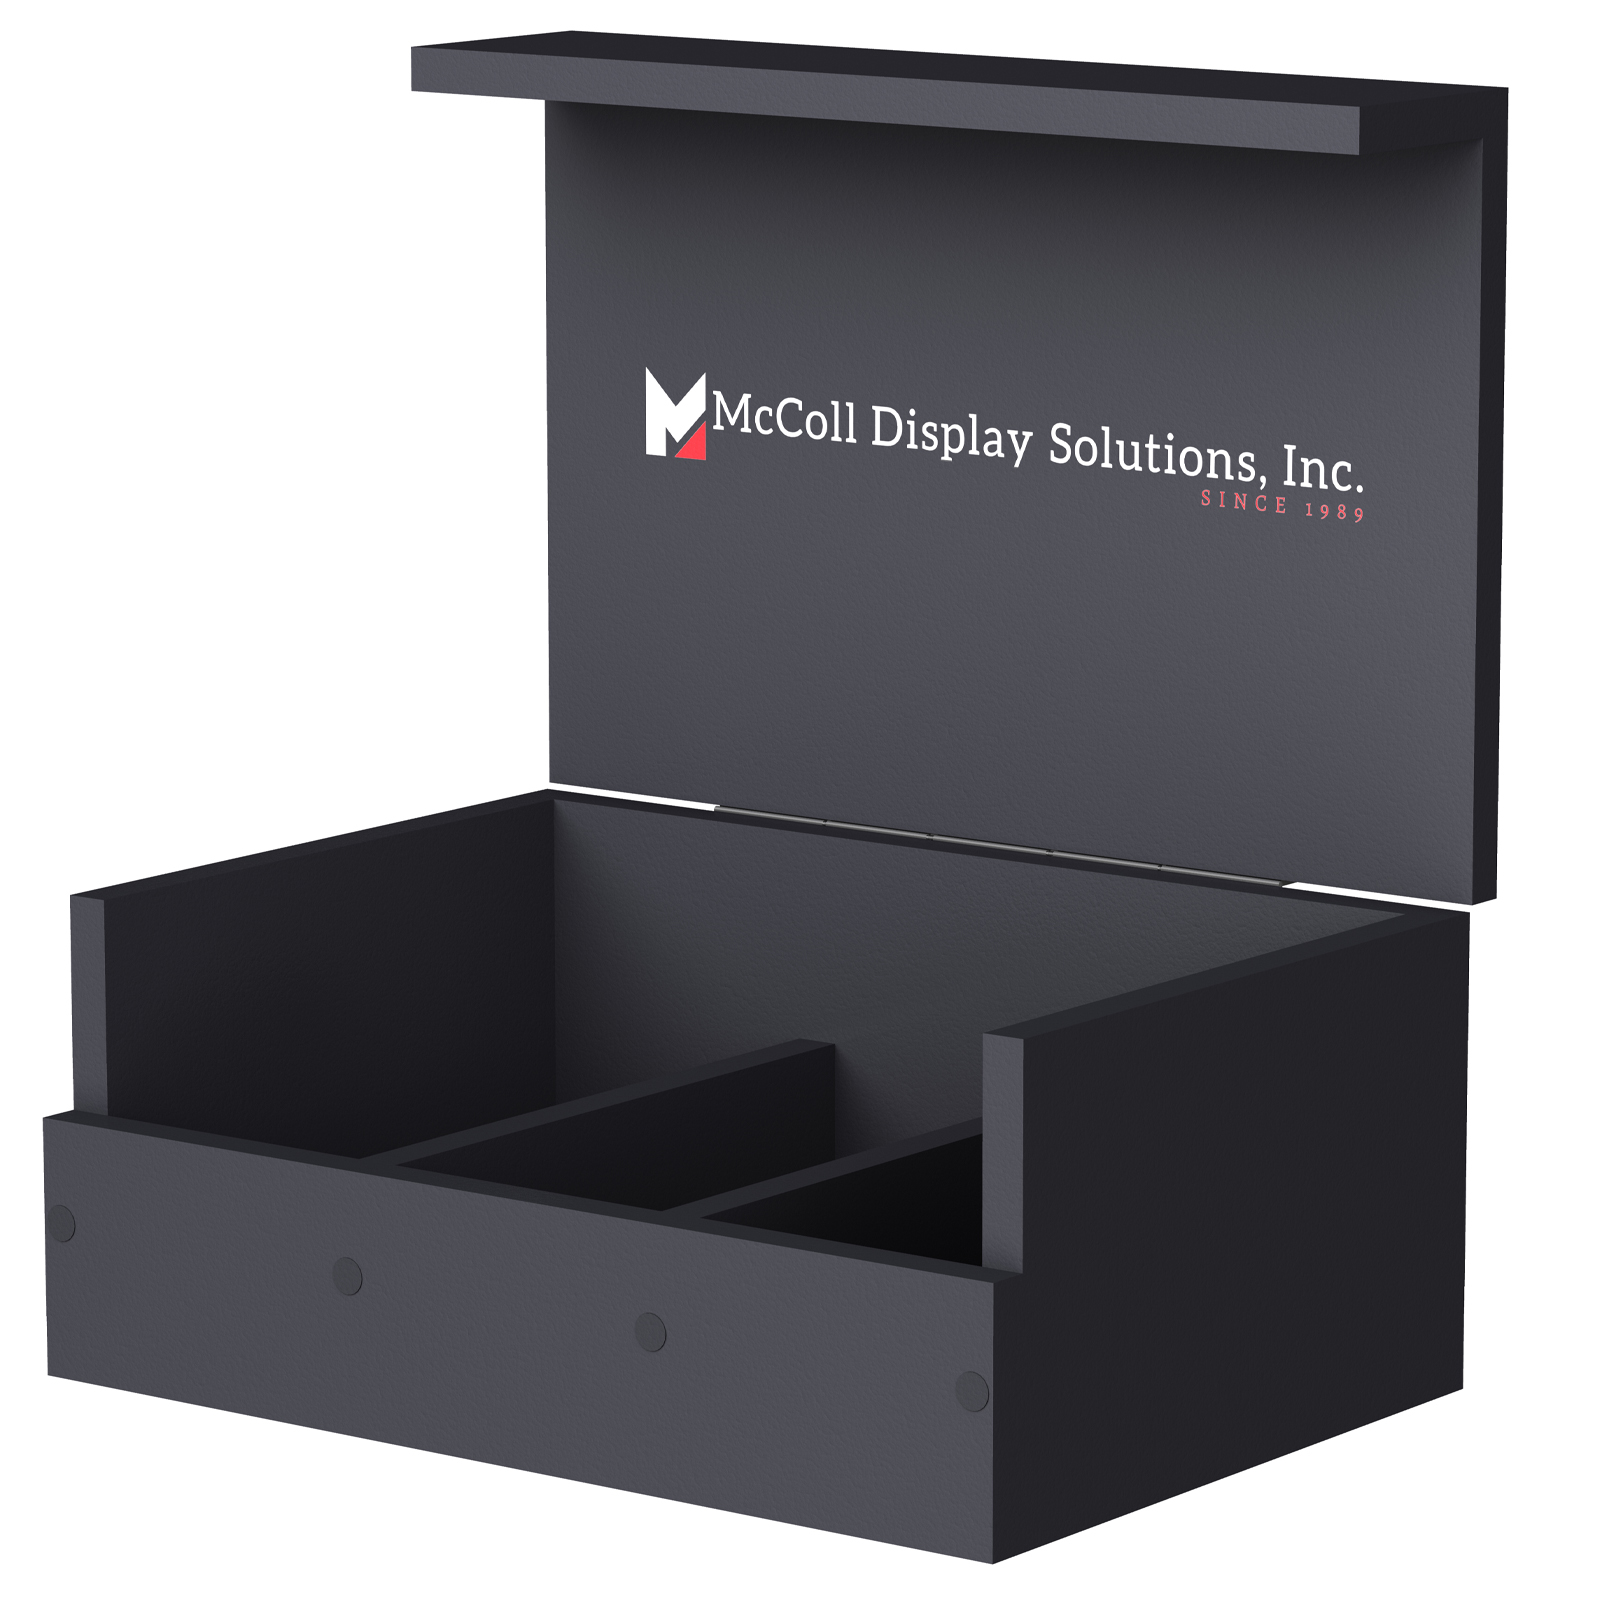 Sturdy Laminate Wood Construction with Substrate Add Screen Printed or Color Printed Placard Signage to this Countertop Sample Box with Lid and Clasp